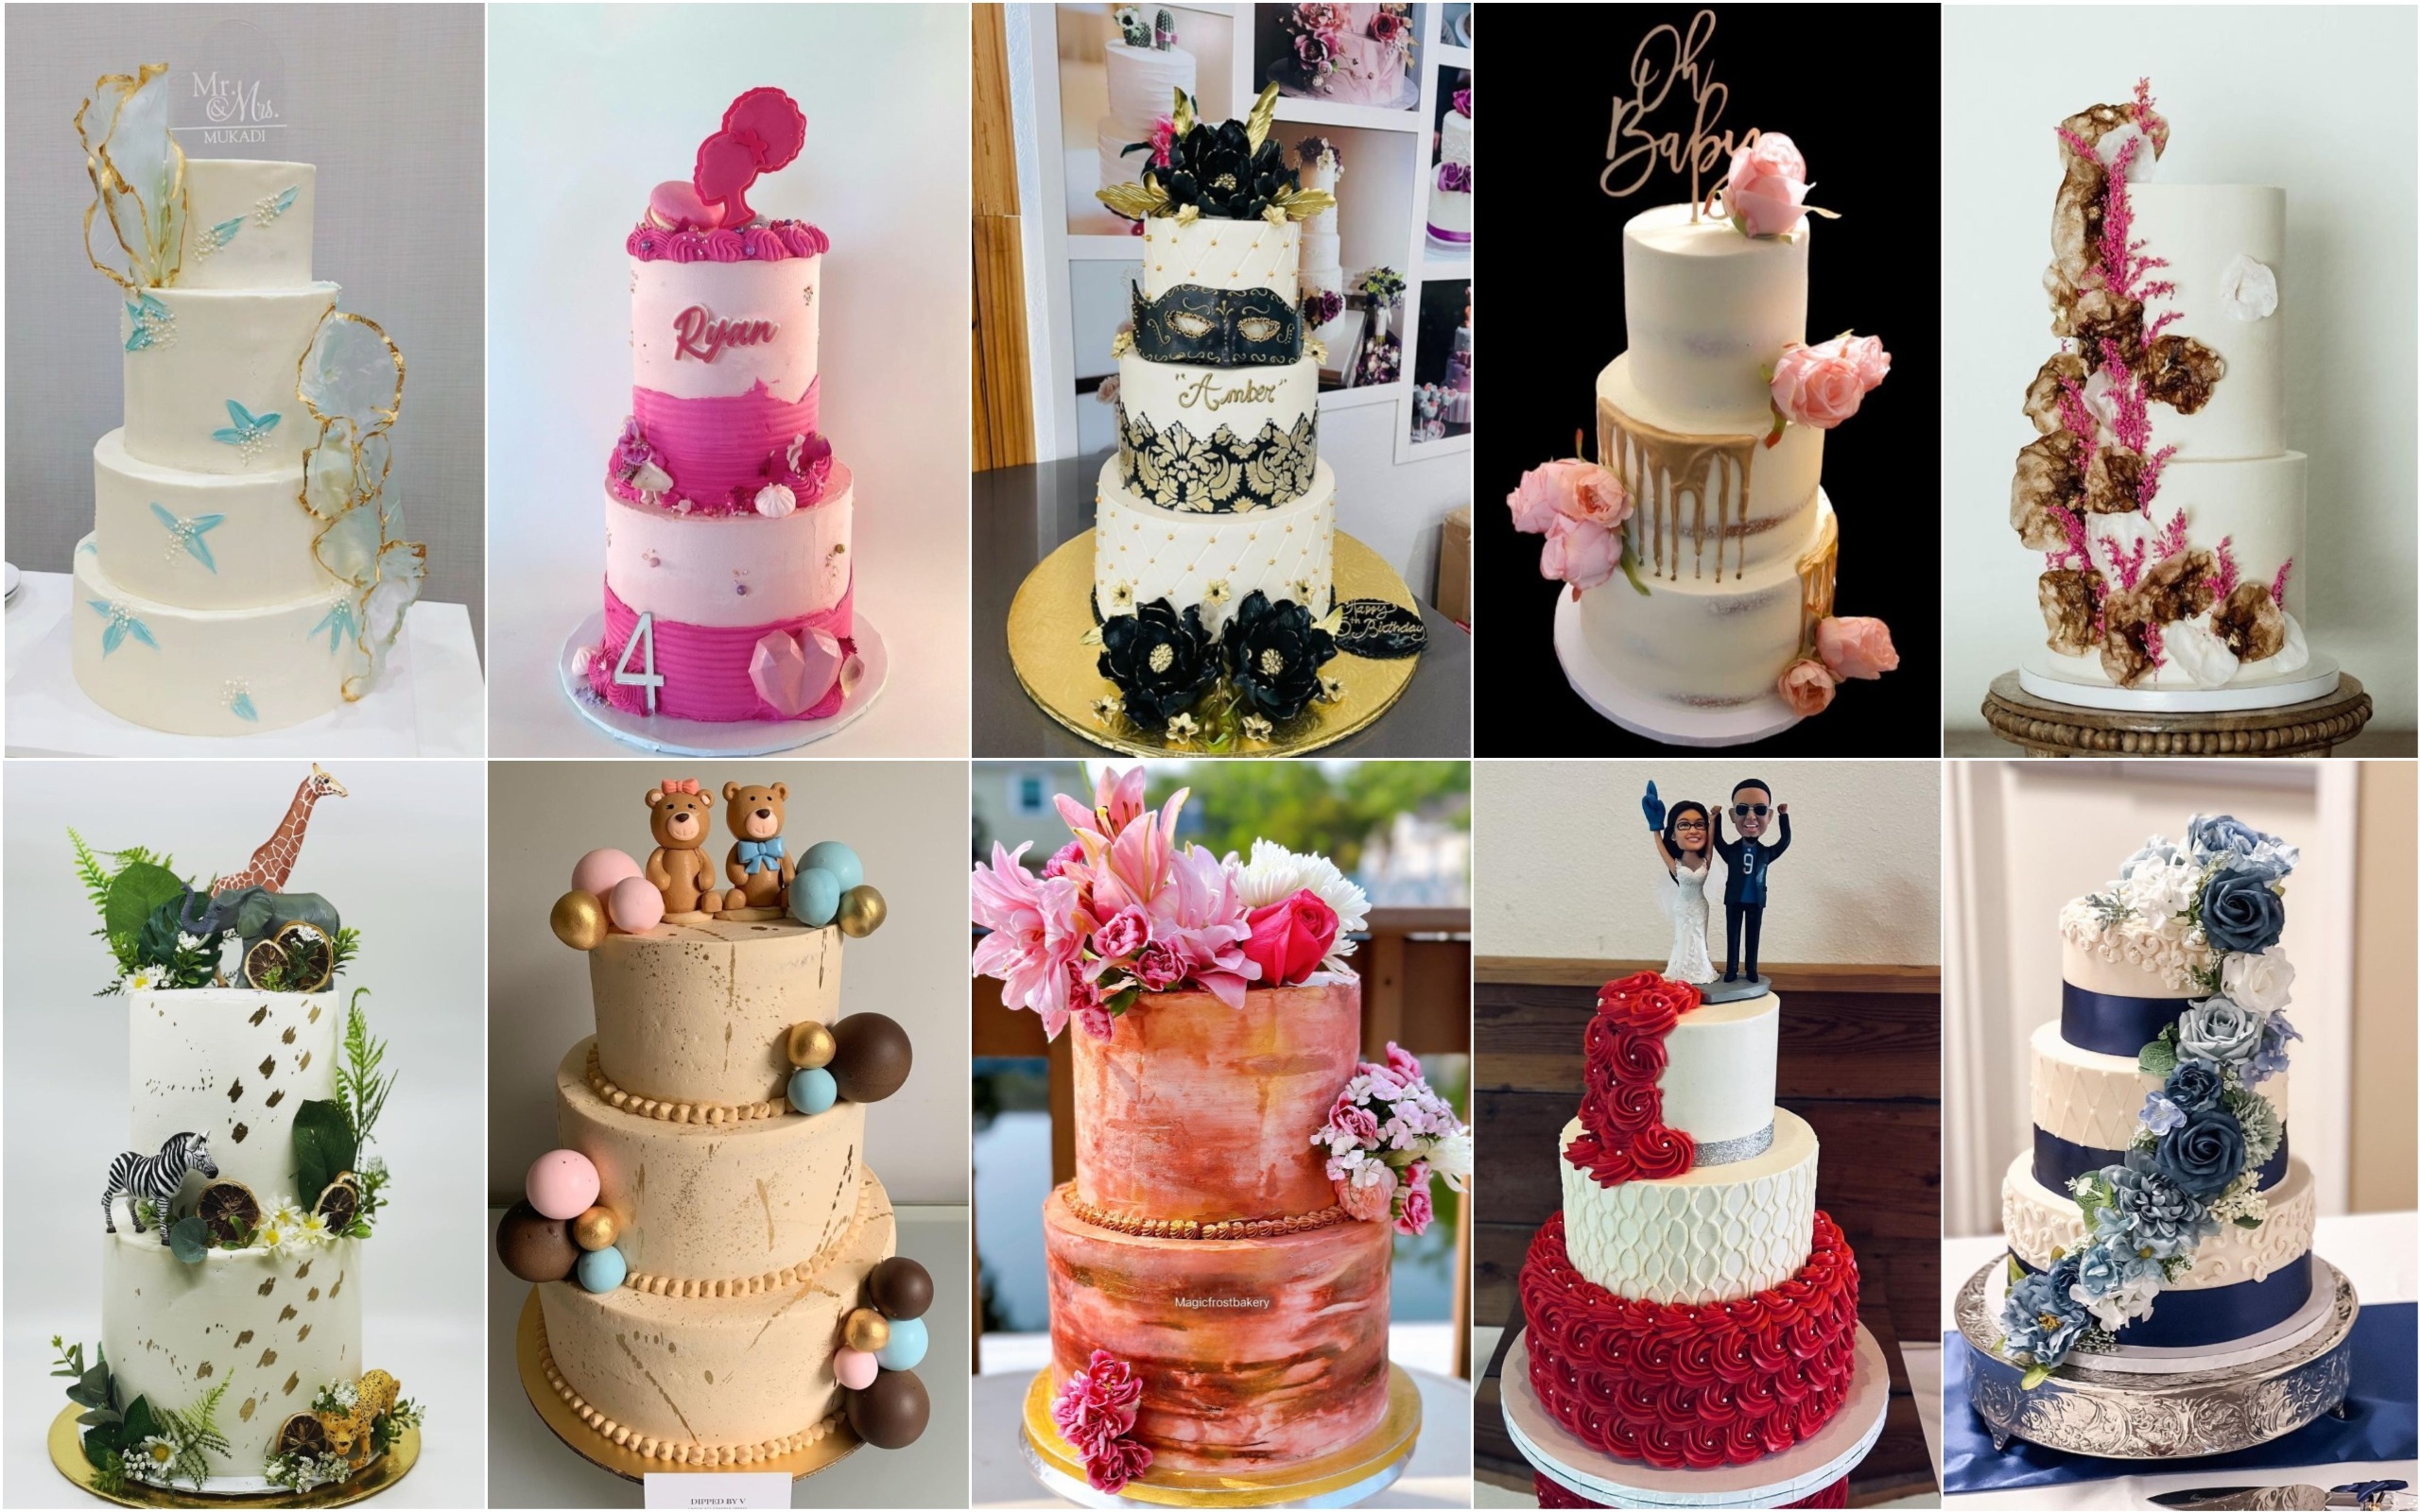 Favorite Cakes - Join the group👉Favorite Cake 👉Cake world... | Facebook